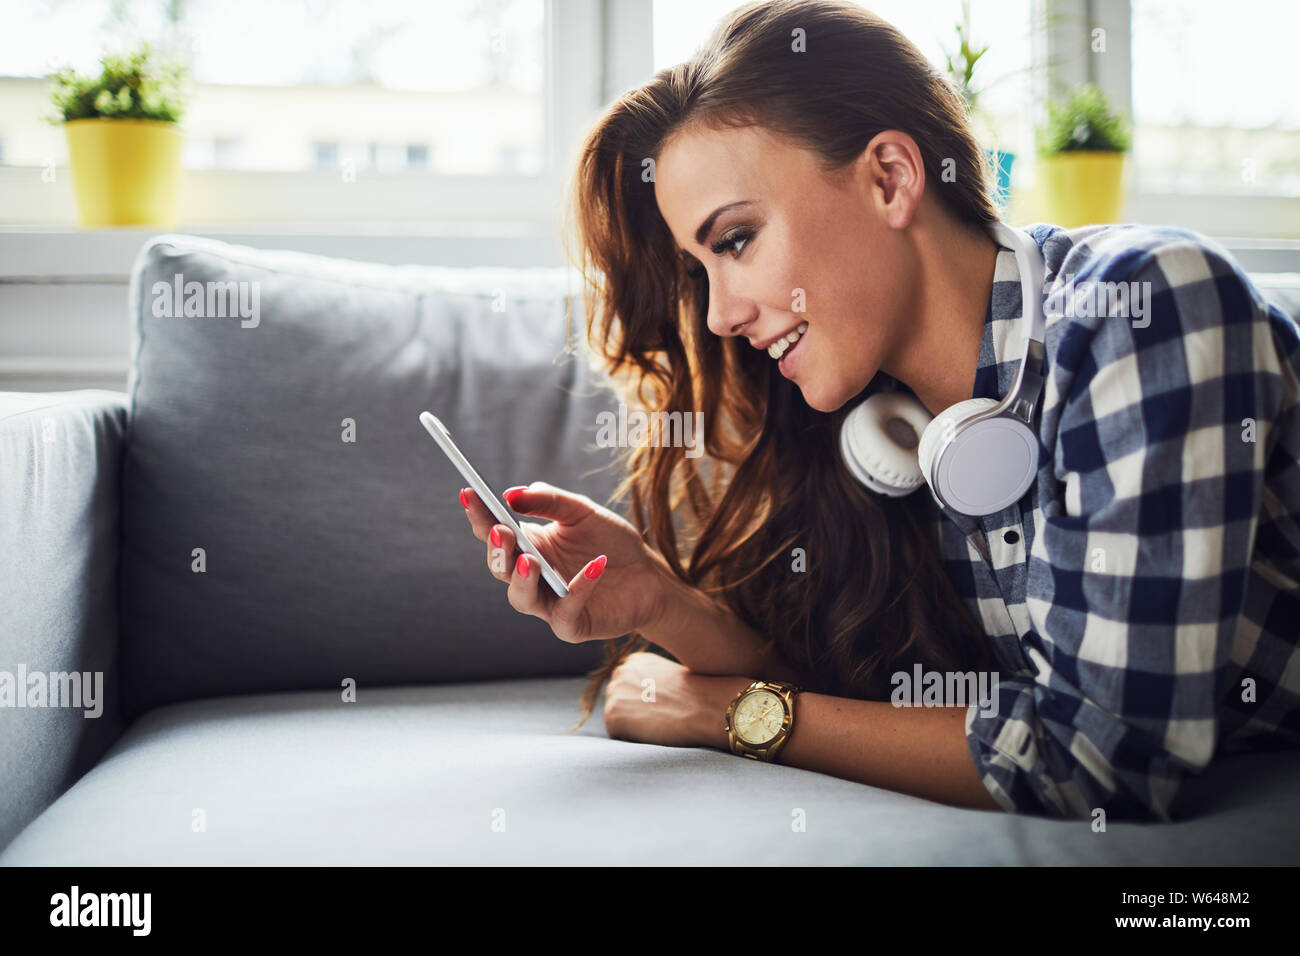 Side view of a young attractive woman smiling and looking at phone while lying on sofa Stock Photo